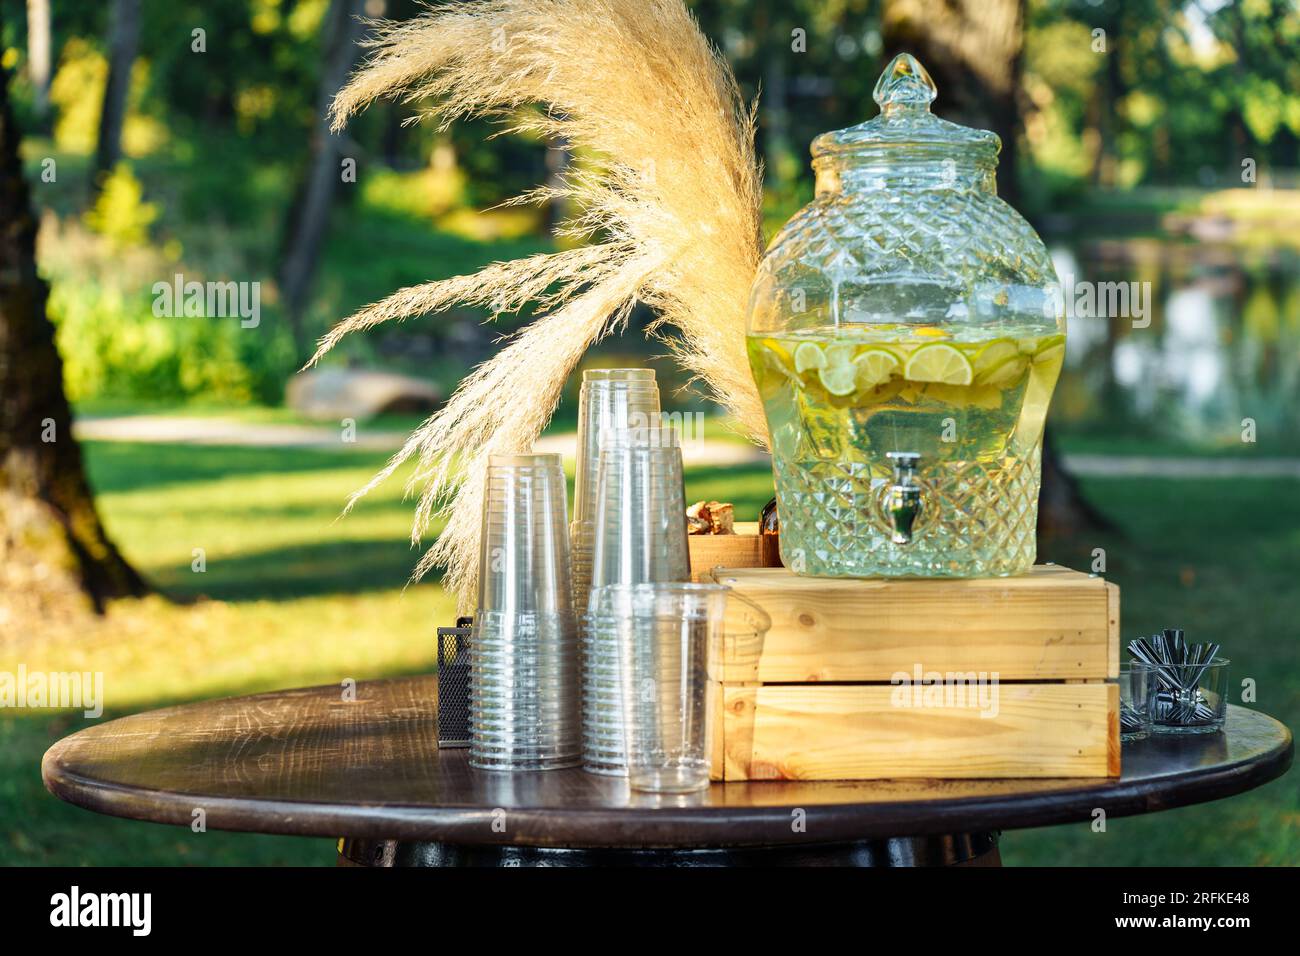 Lemonade in a glass decorative beverage dispenser, one-time glasses on the table during a garden party. Stock Photo